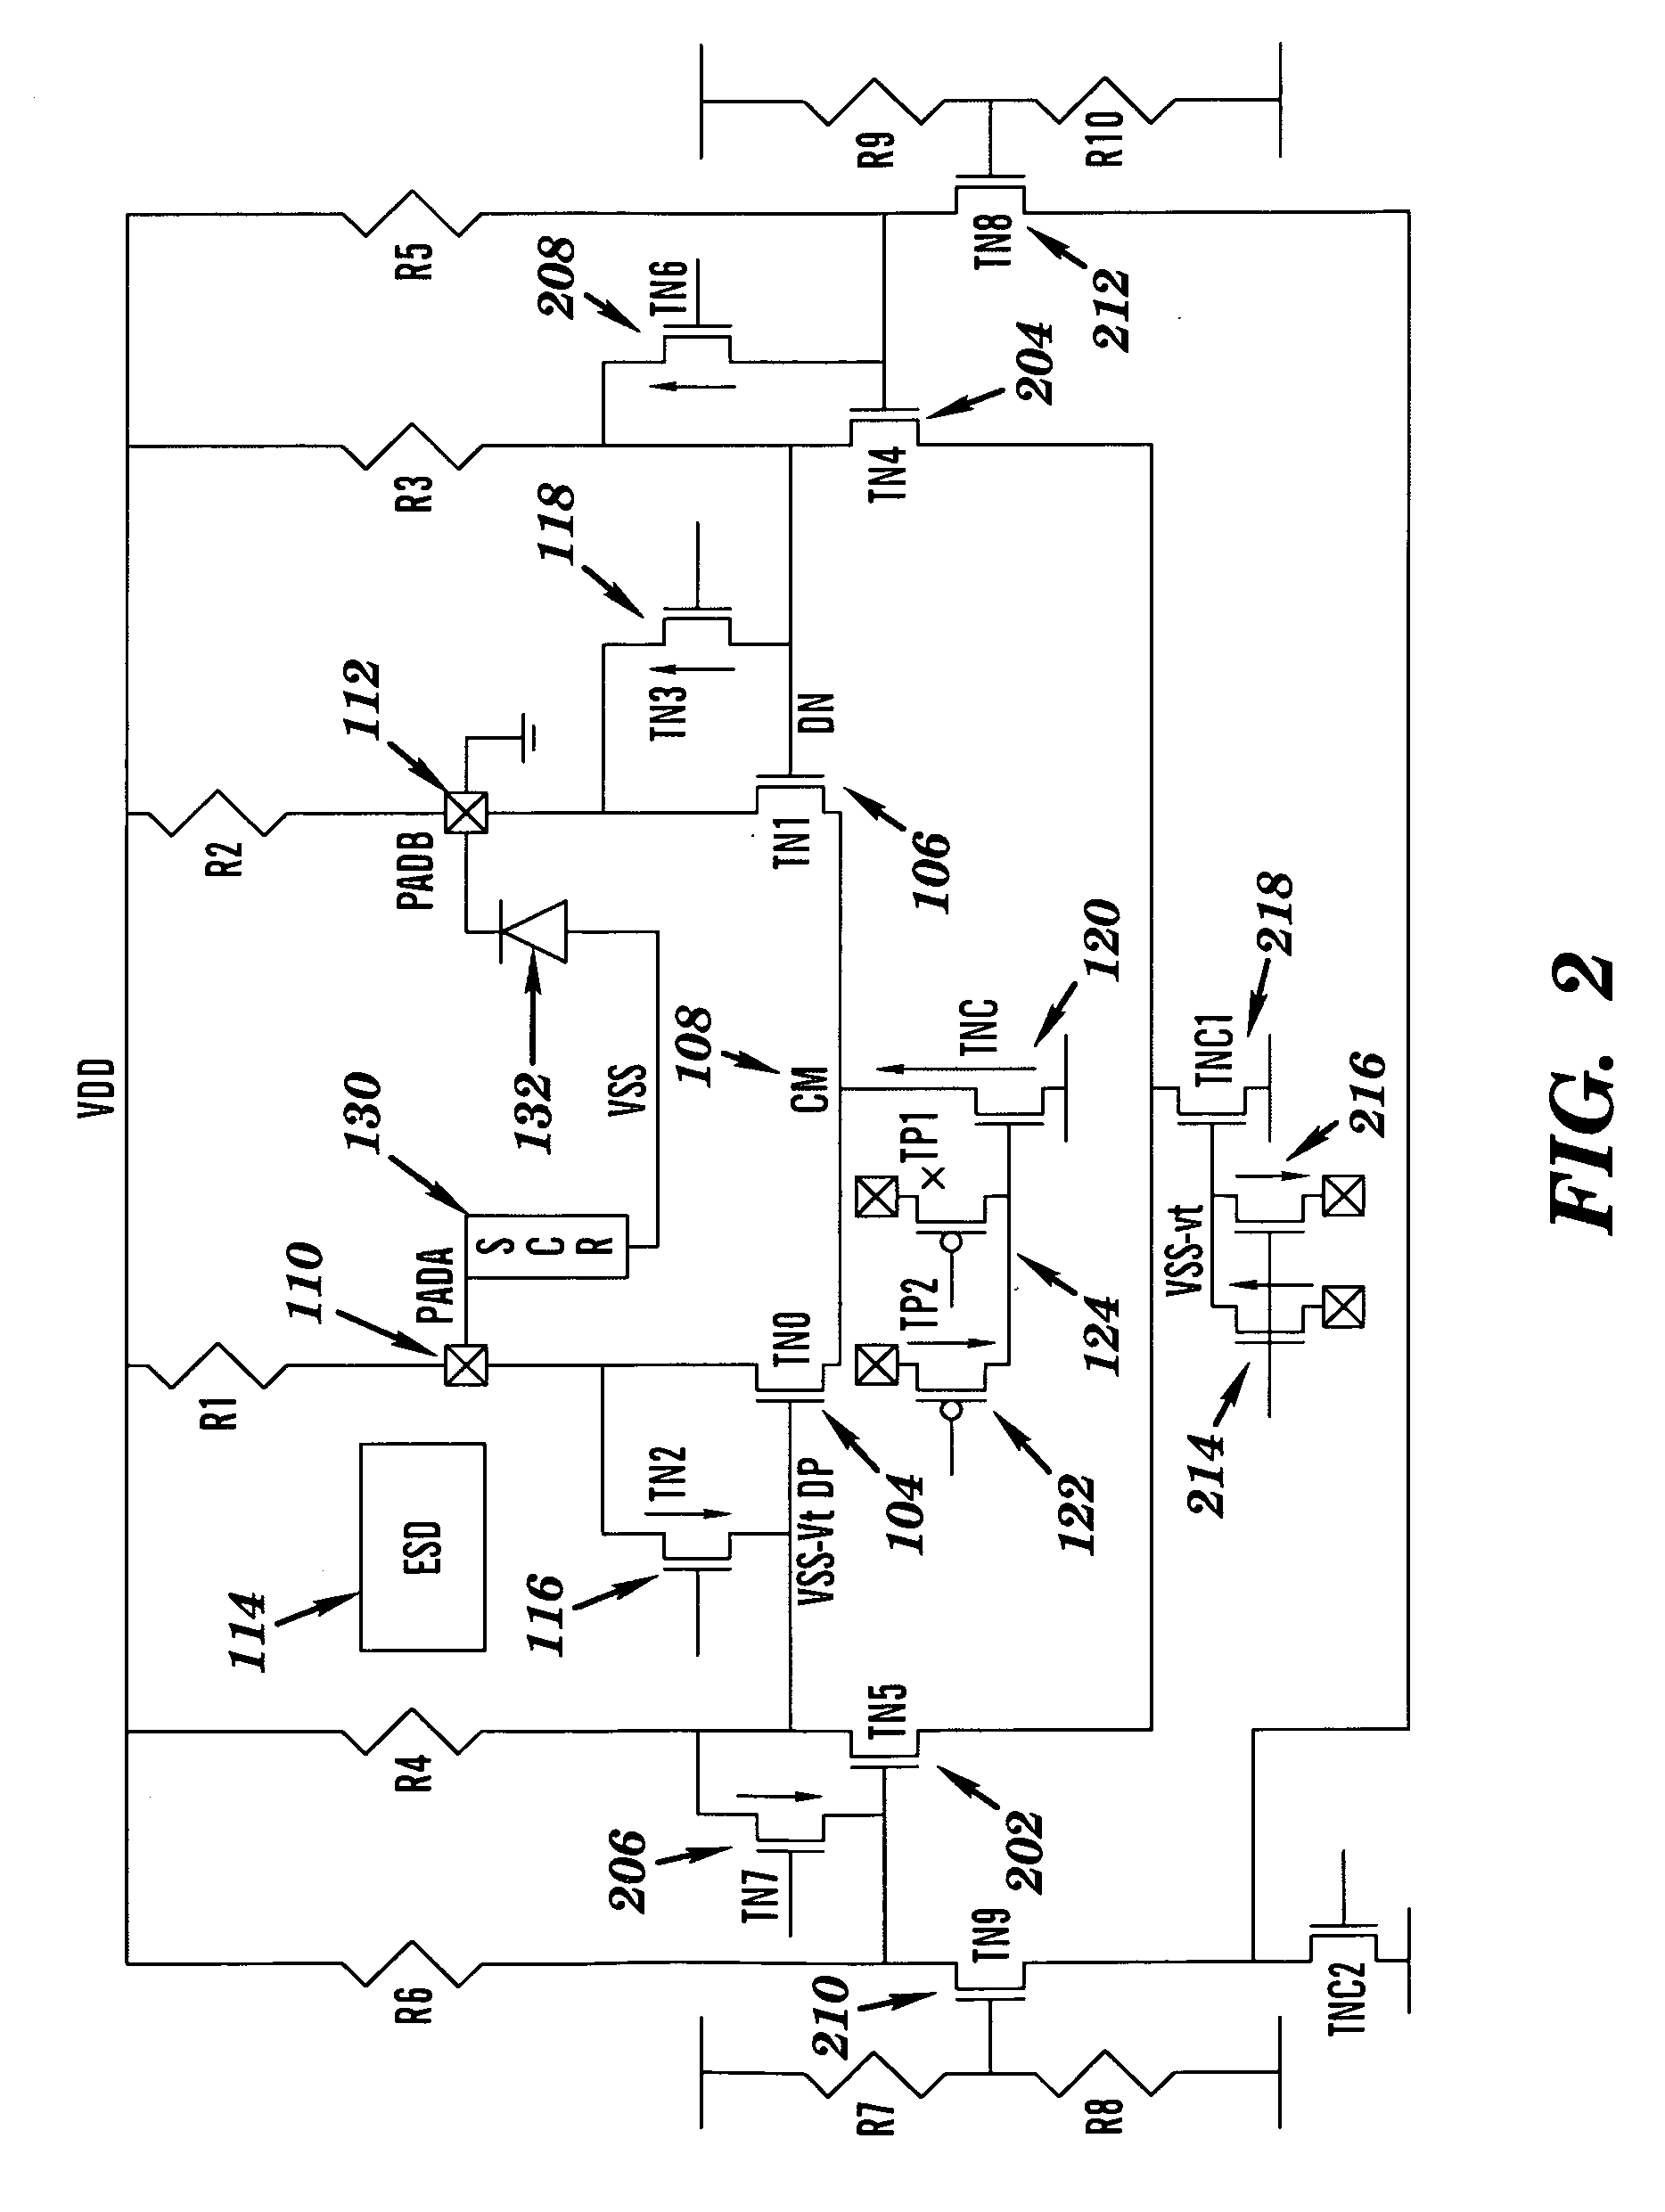 Method, design structures, and systems for current mode logic (CML) differential driver ESD protection circuitry